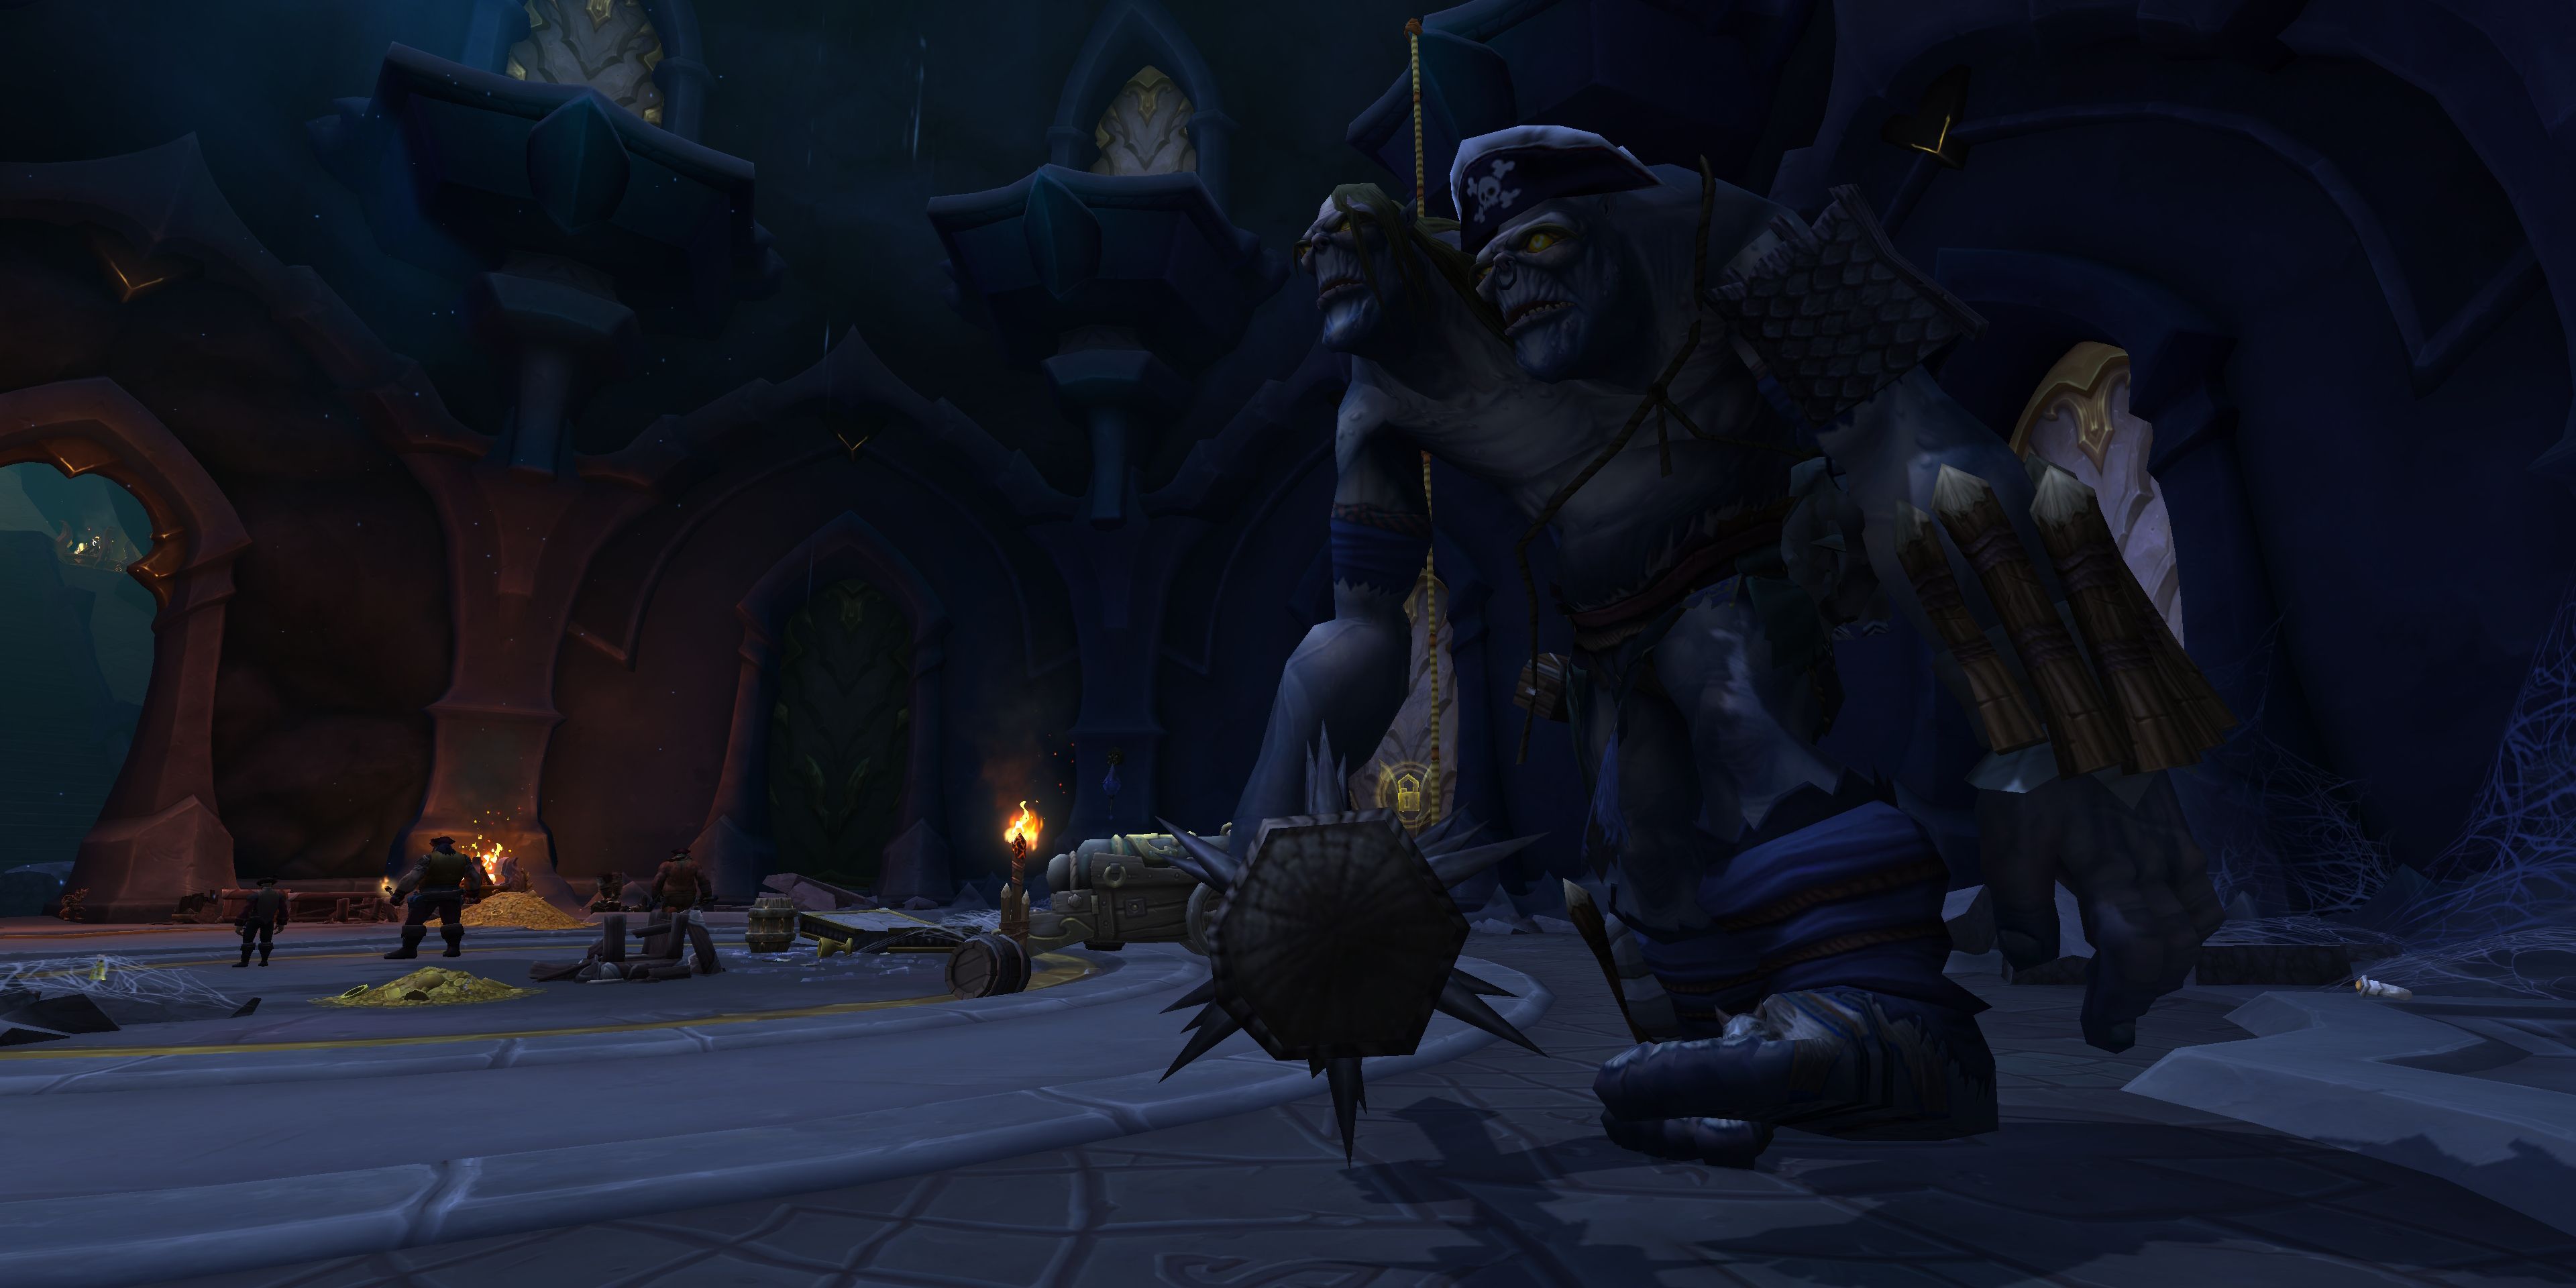 A large two headed ogre wearing pirate hats and carrying clubs is patrolling the inside of the Zskera Vaults